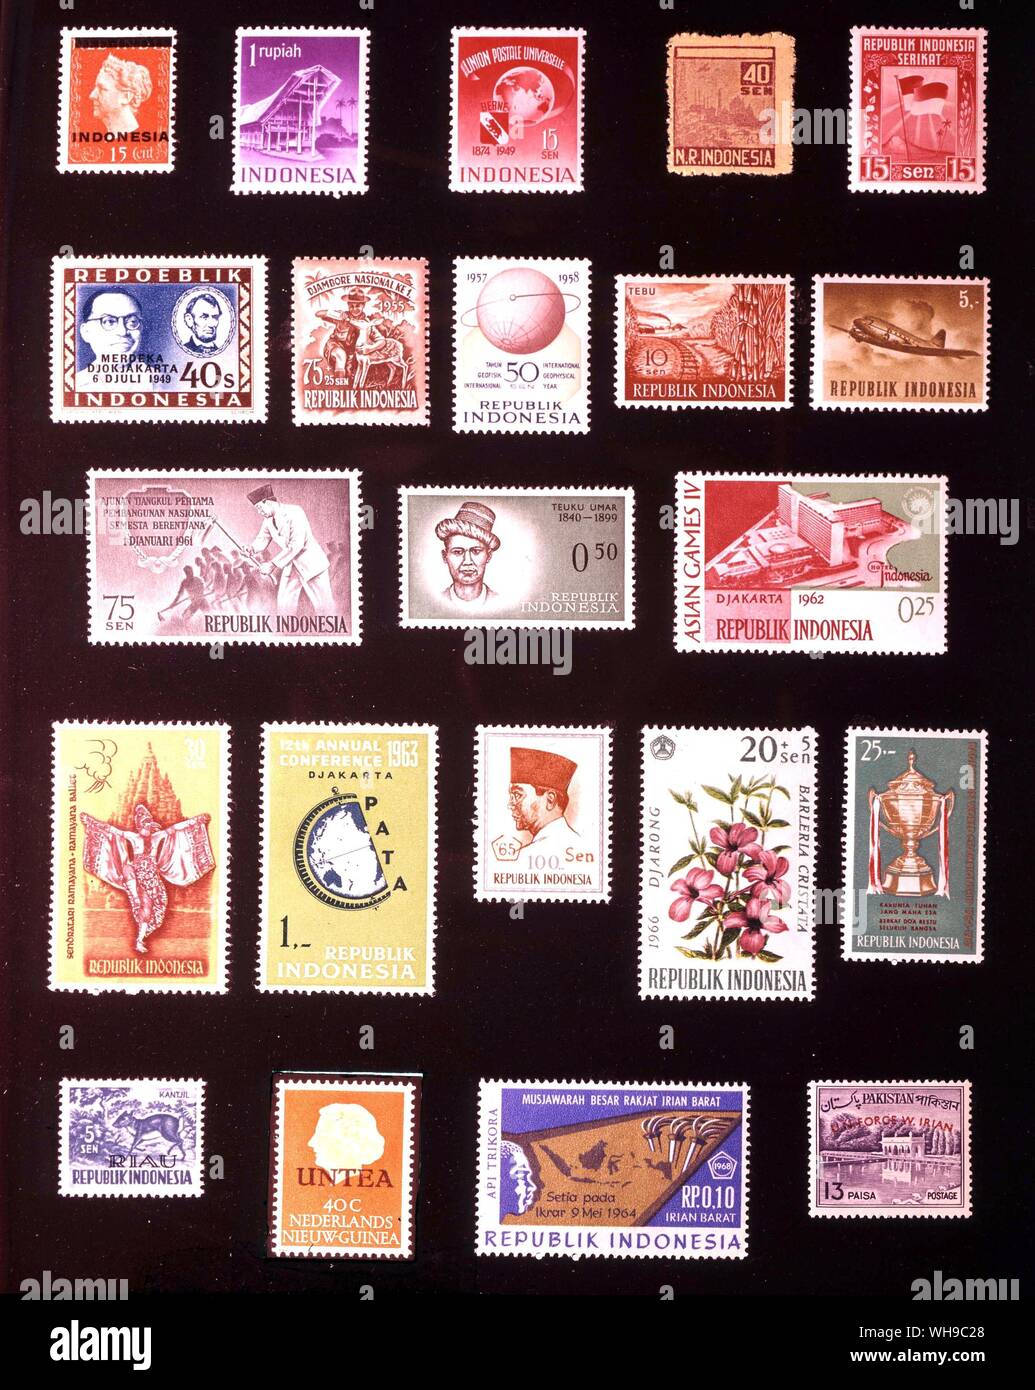 ASIA - INDONESIA: (left to right) 1. Indonesia, 15 cents, 1948, 2. Indonesia, 1 rupiah, 1949, 3. Indonesia, 15 sen, 1949, 4. Indonesian Republic, 40 sen, 1946, 5. United States of Indonesia, 15 sen, 1950, 6. Indonesian Republic, 40 sen, 1949, 7. Indonesia, 75 + 25 sen, 1955, 8. Indonesia, 50 sen, 1958, 9. Indonesia, 10 sen, 1960, 10. Indonesia, 5 rupiahs, 1964, 11. Indonesia, 75 sen, 1961, 12. Indonesia, 50 sen, 1961, 13. Indonesia, 25 sen, 1962, 14. Indonesia, 30 sen, 1962, 15. Indonesia, 1 rupiah, 1963, 16. Indonesia, 100 sen, 1965, 17. Indonesia, 20 + 5 sen, 1966, 18. Indonesia, 25 Stock Photo